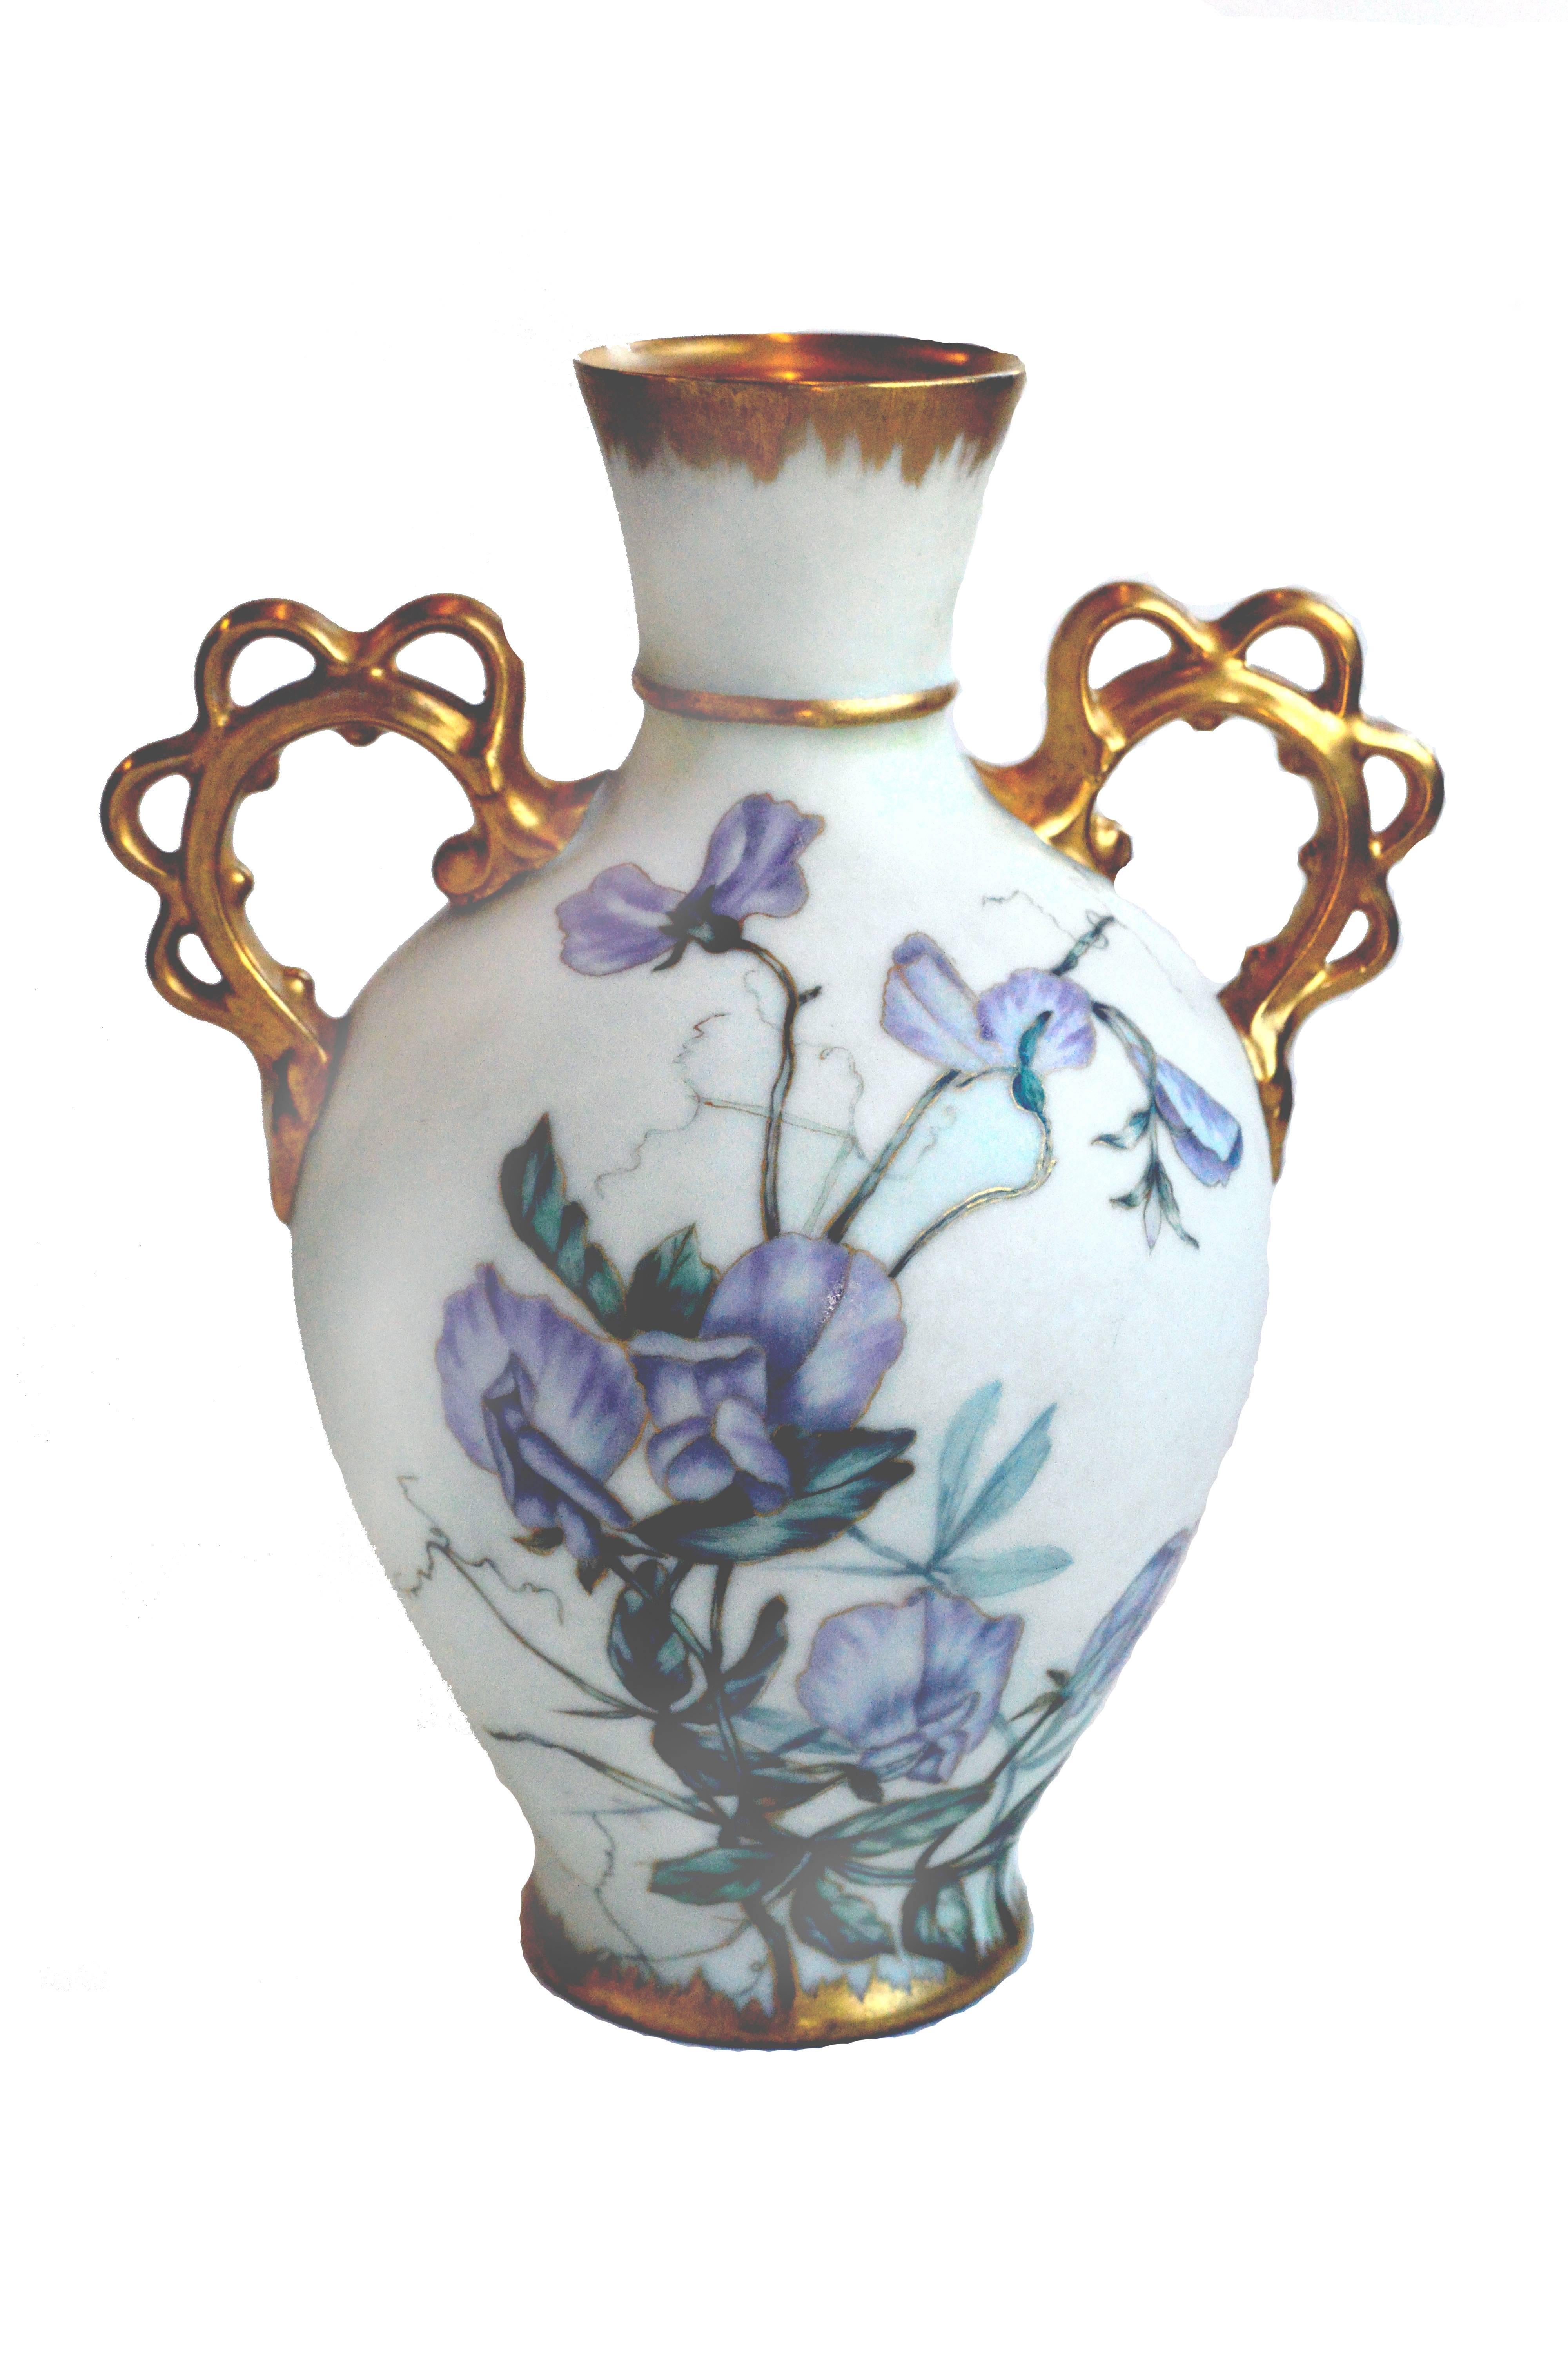 American amateur painting on French Limoges vase, circa 1897. Real French Limoges is a porcelain item manufactured in Limoges, France. Remy Delinieres took over the operation of an existing company and founded R. Delinieres & Co. in 1879.